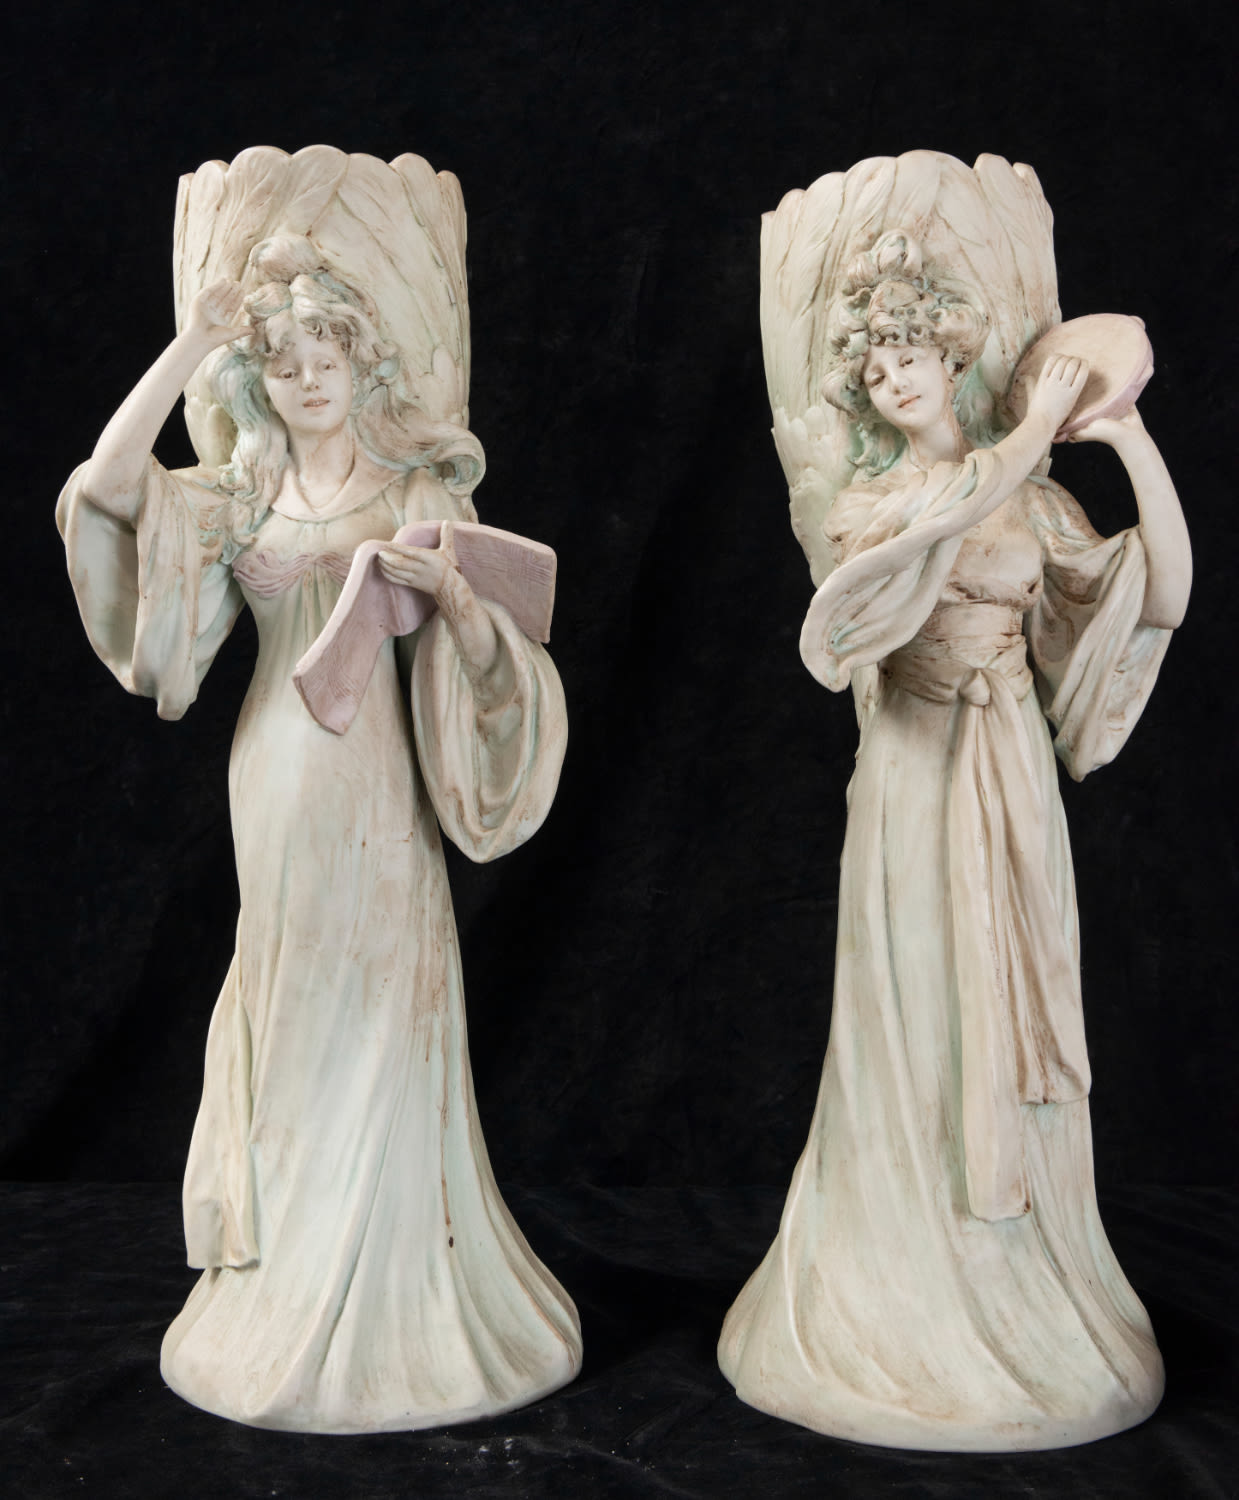 Pair of women's biscuit bucaros with book and tambourine, Italian school, 19th - 21st centuries